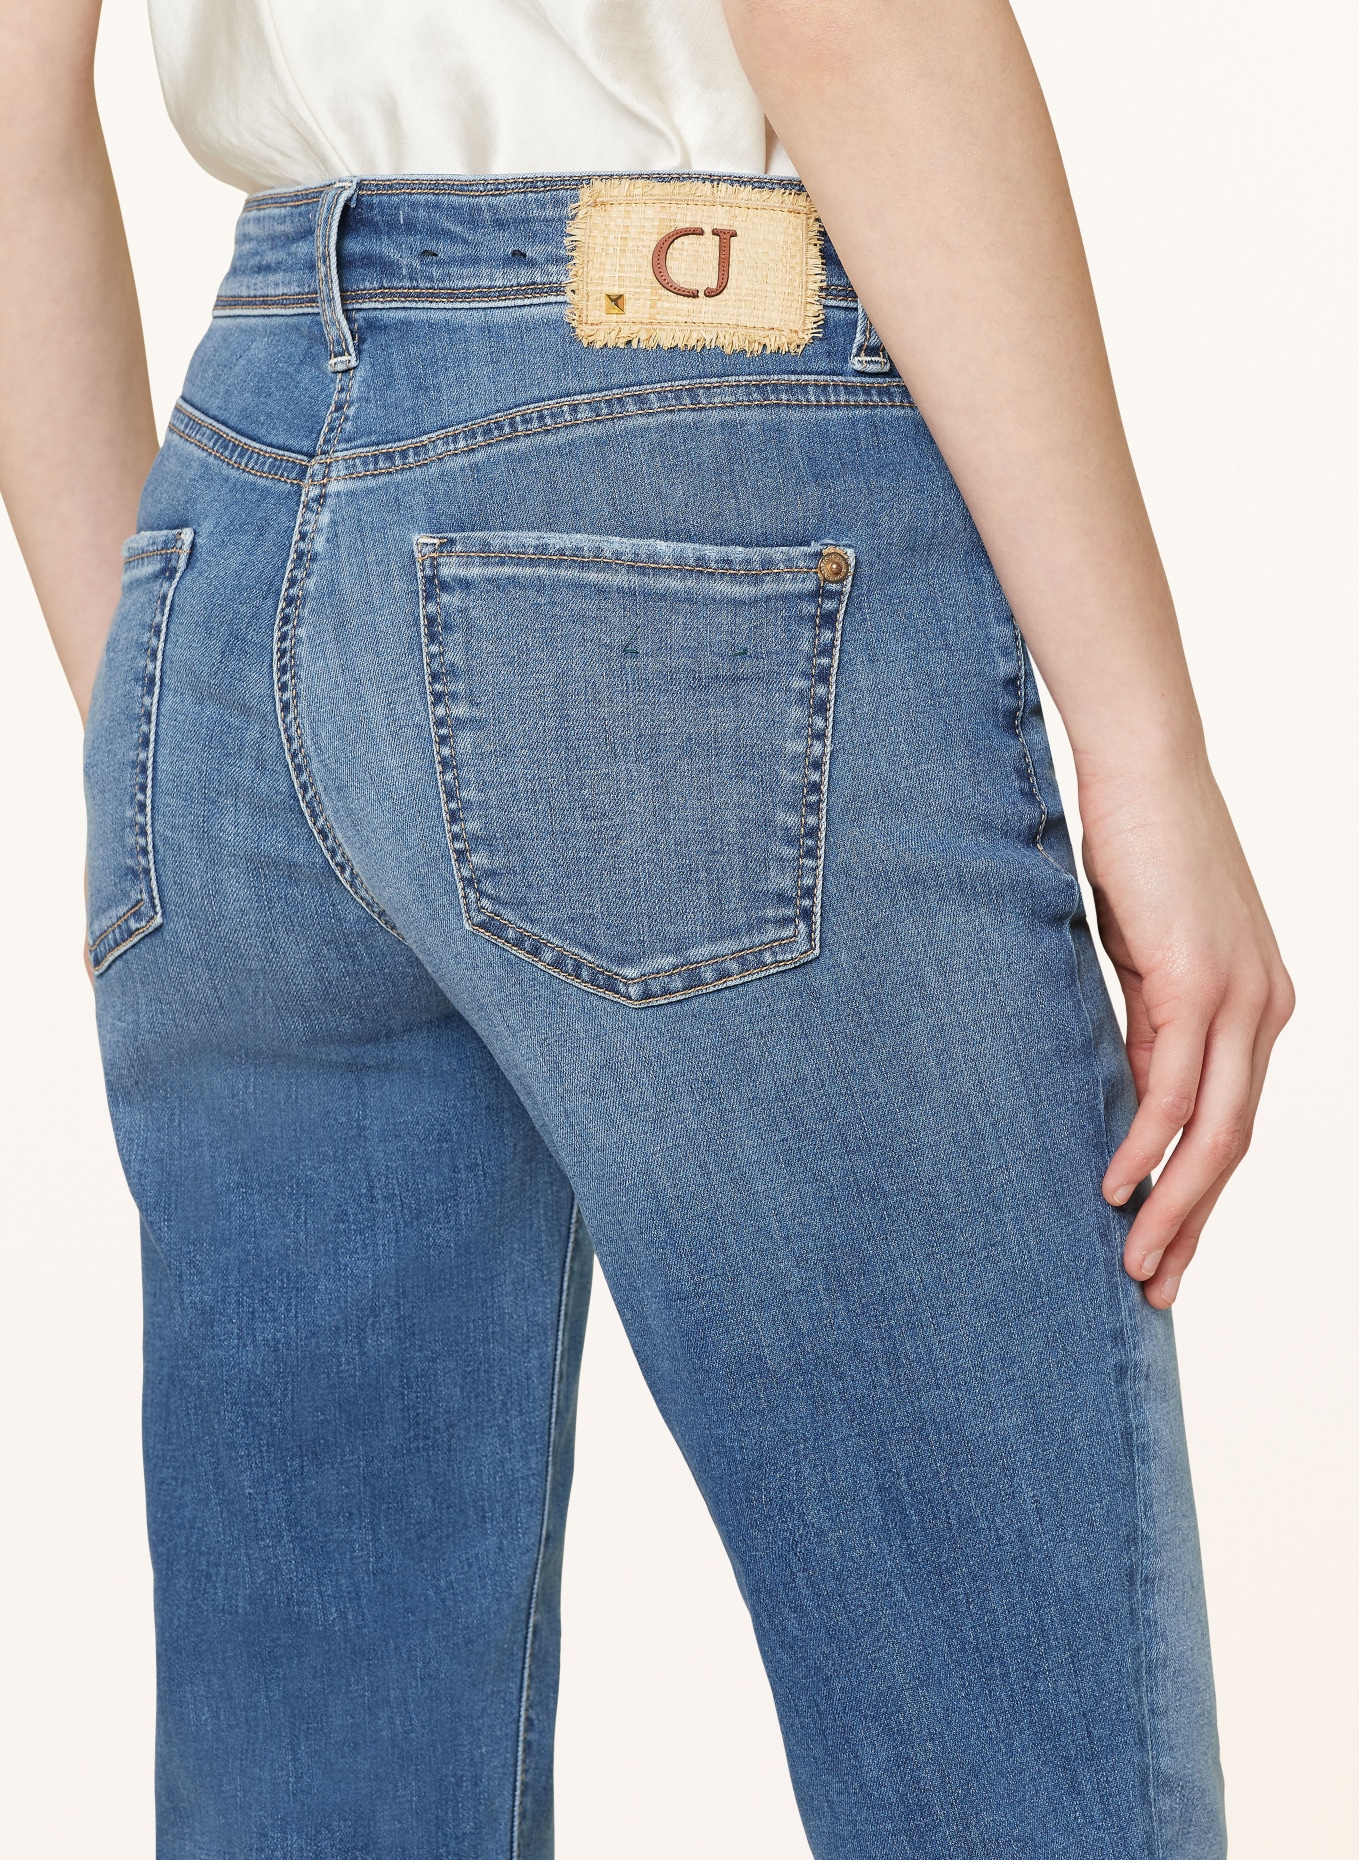 CAMBIO 7/8 jeans PIPER, Color: 5355 summer nights fringed (Image 5)